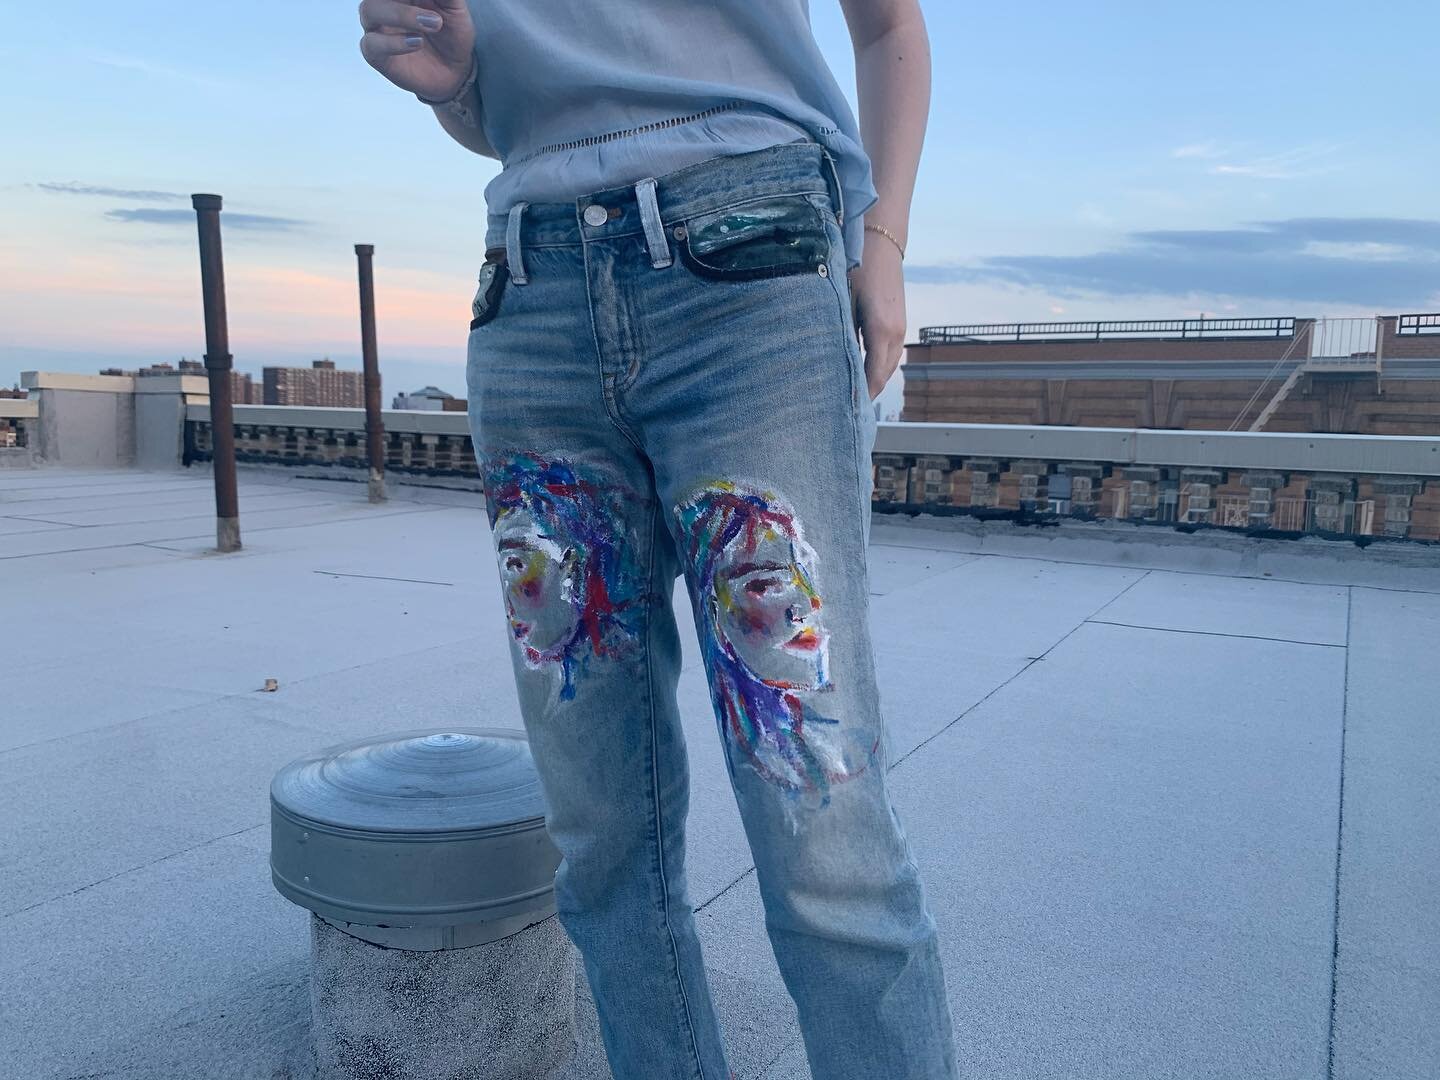 my first painted thrifted jeans!

images inspired from &ldquo;Portrait of a Lady on Fire&rdquo; and &ldquo;Midsommar&rdquo; and the myths of Orpheus &amp; Eurydice and Medusa. The faces on the thighs were made up on the spot, but add a nice touch!

A